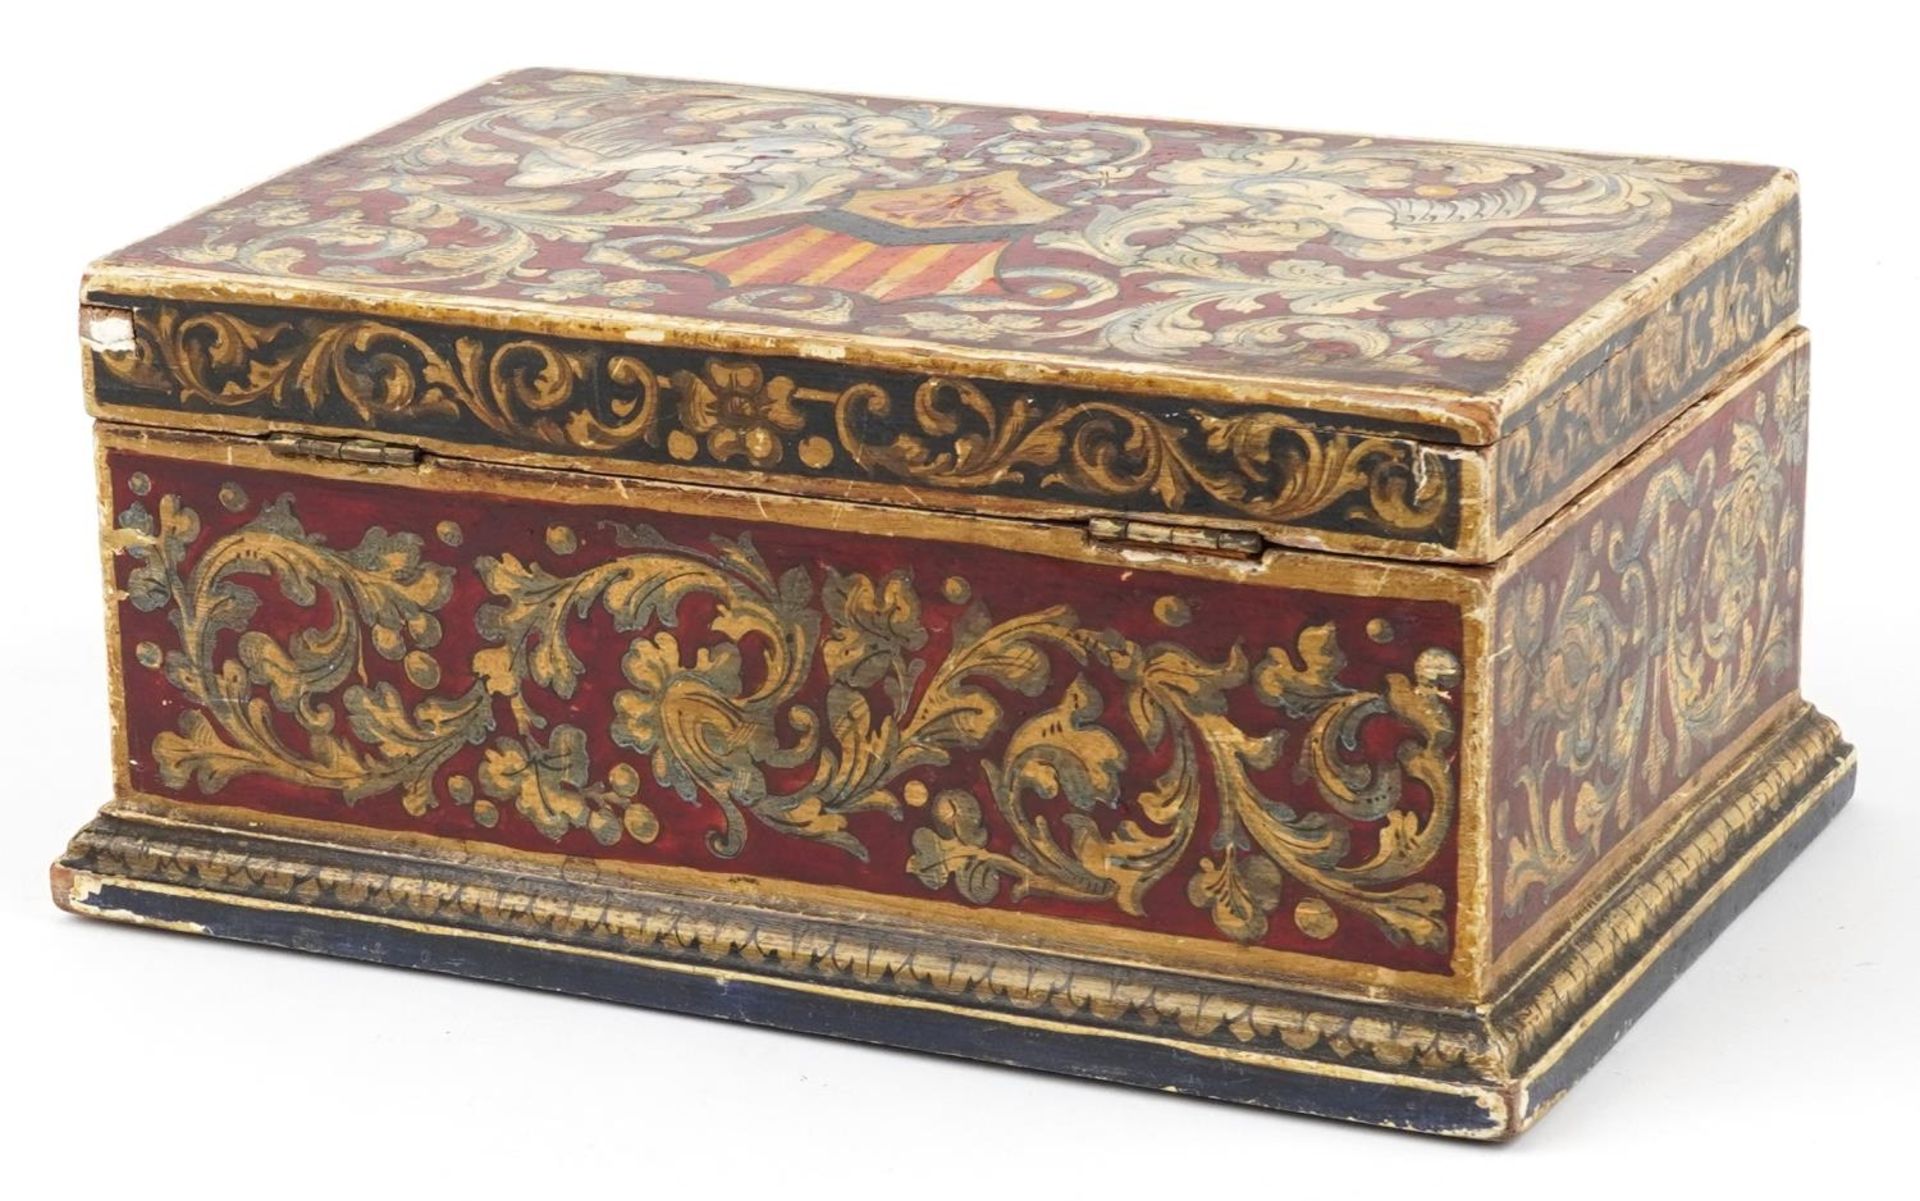 Antique pine table casket hand painted with gryphons and heraldic shield, 14cm H x 29.5cm W x 19cm D - Image 3 of 4